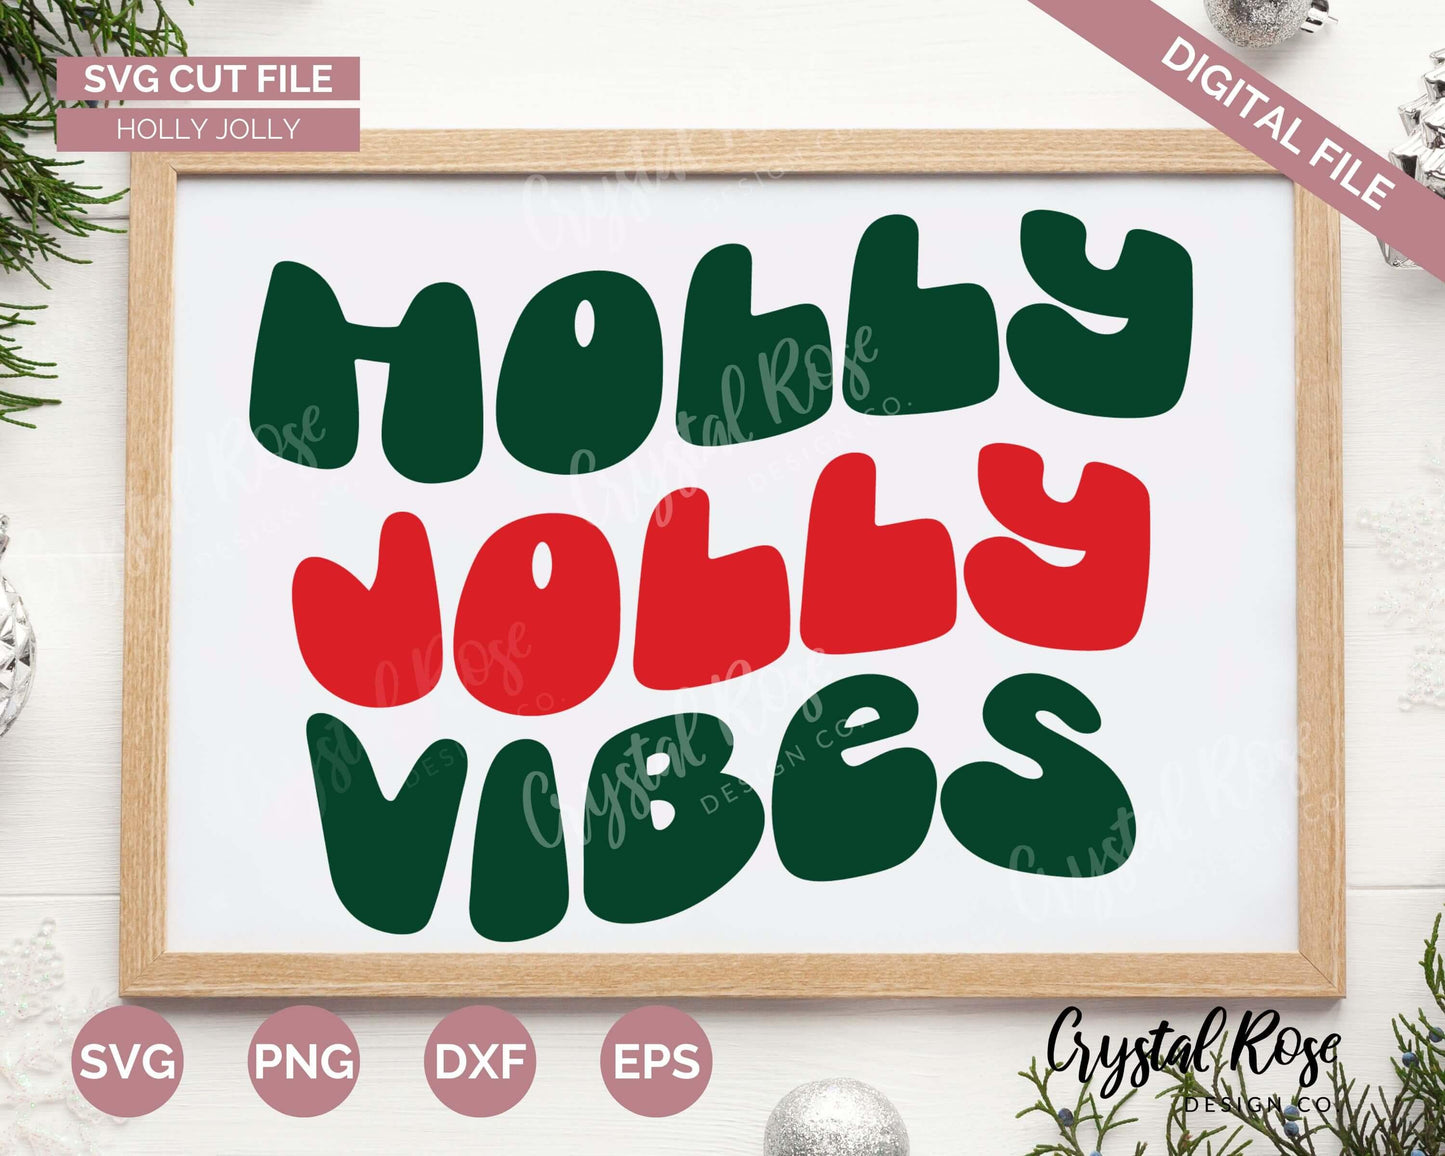 Retro Holly Jolly Vibes SVG, Digital Download, Cricut, Silhouette, Glowforge (includes svg/png/dxf/eps)